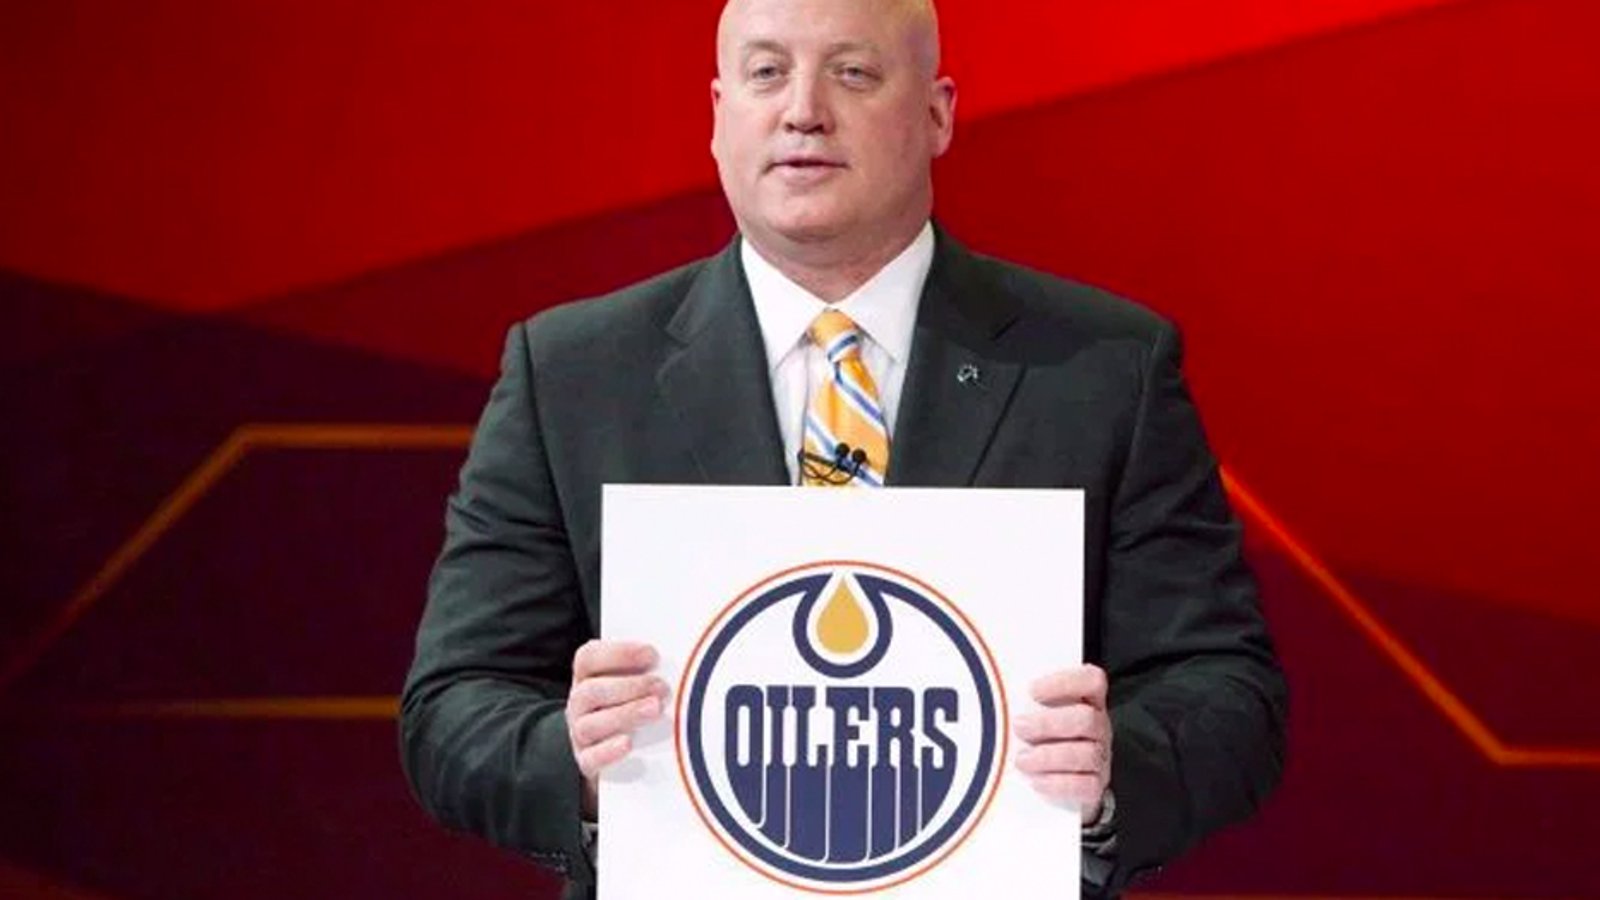 NHL proposes Draft lottery changes that would prevent more “Oilers and Devils situations”